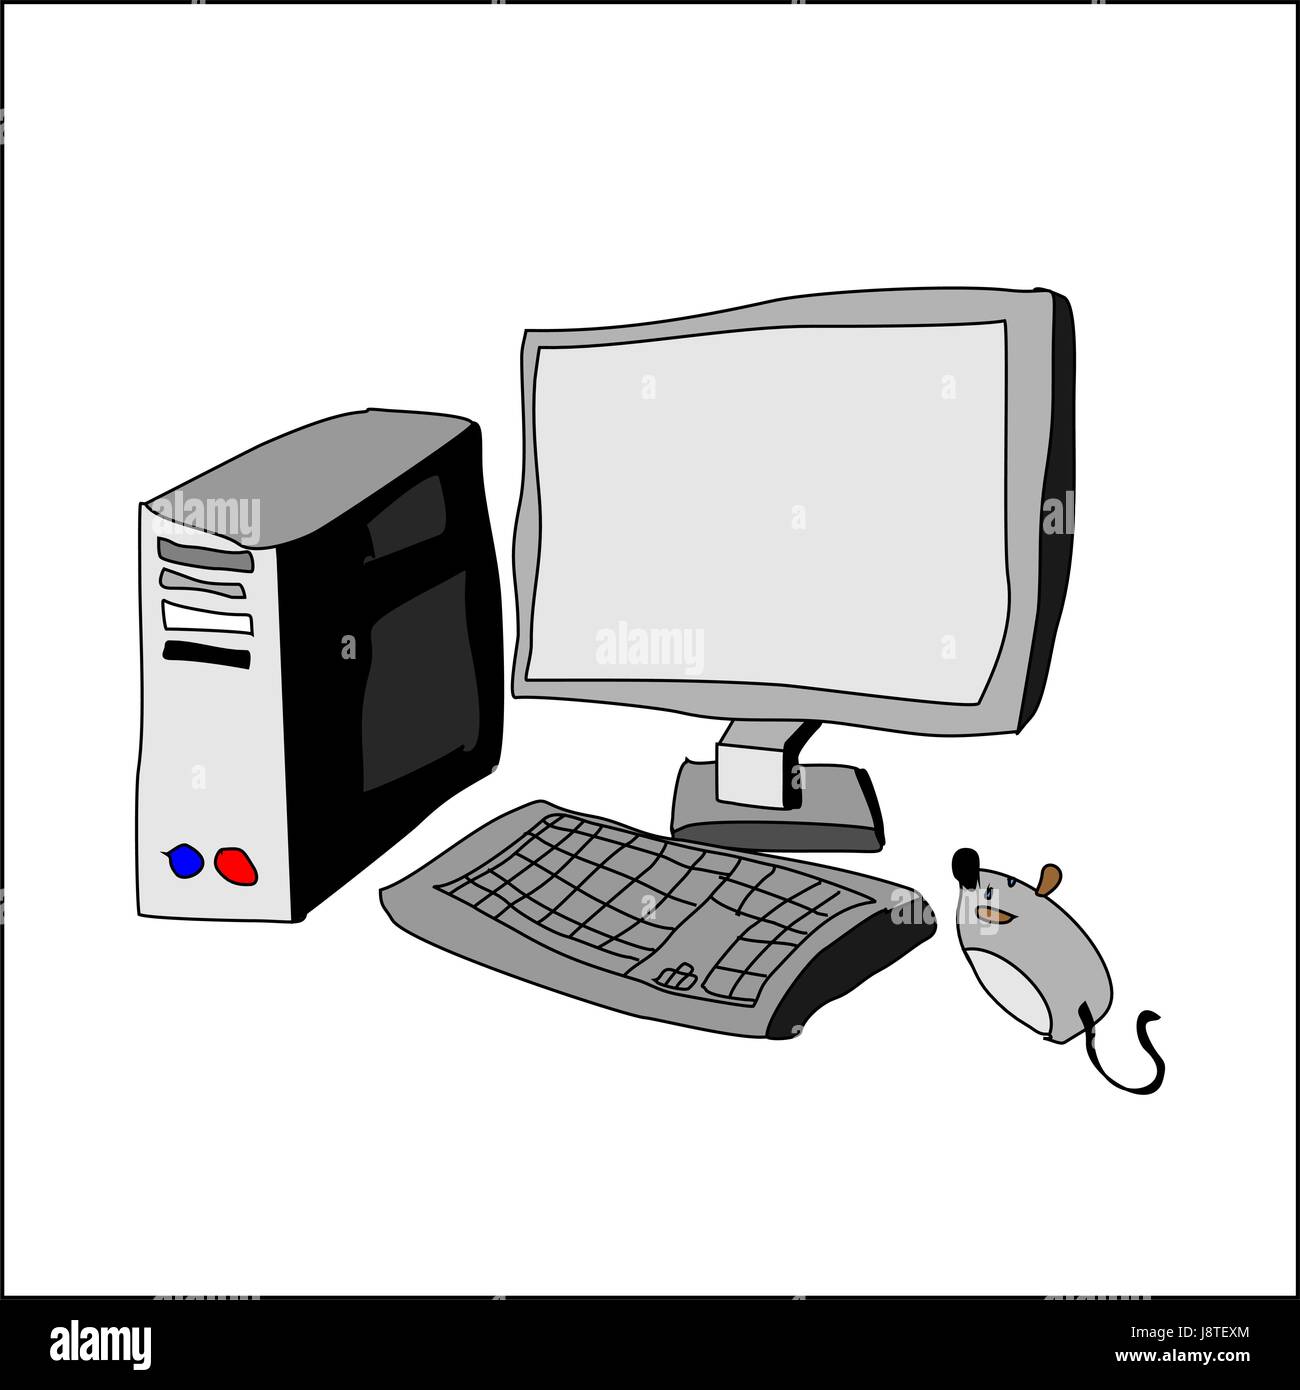 Computer hand drawing system unit and keyboard Vector Image-saigonsouth.com.vn